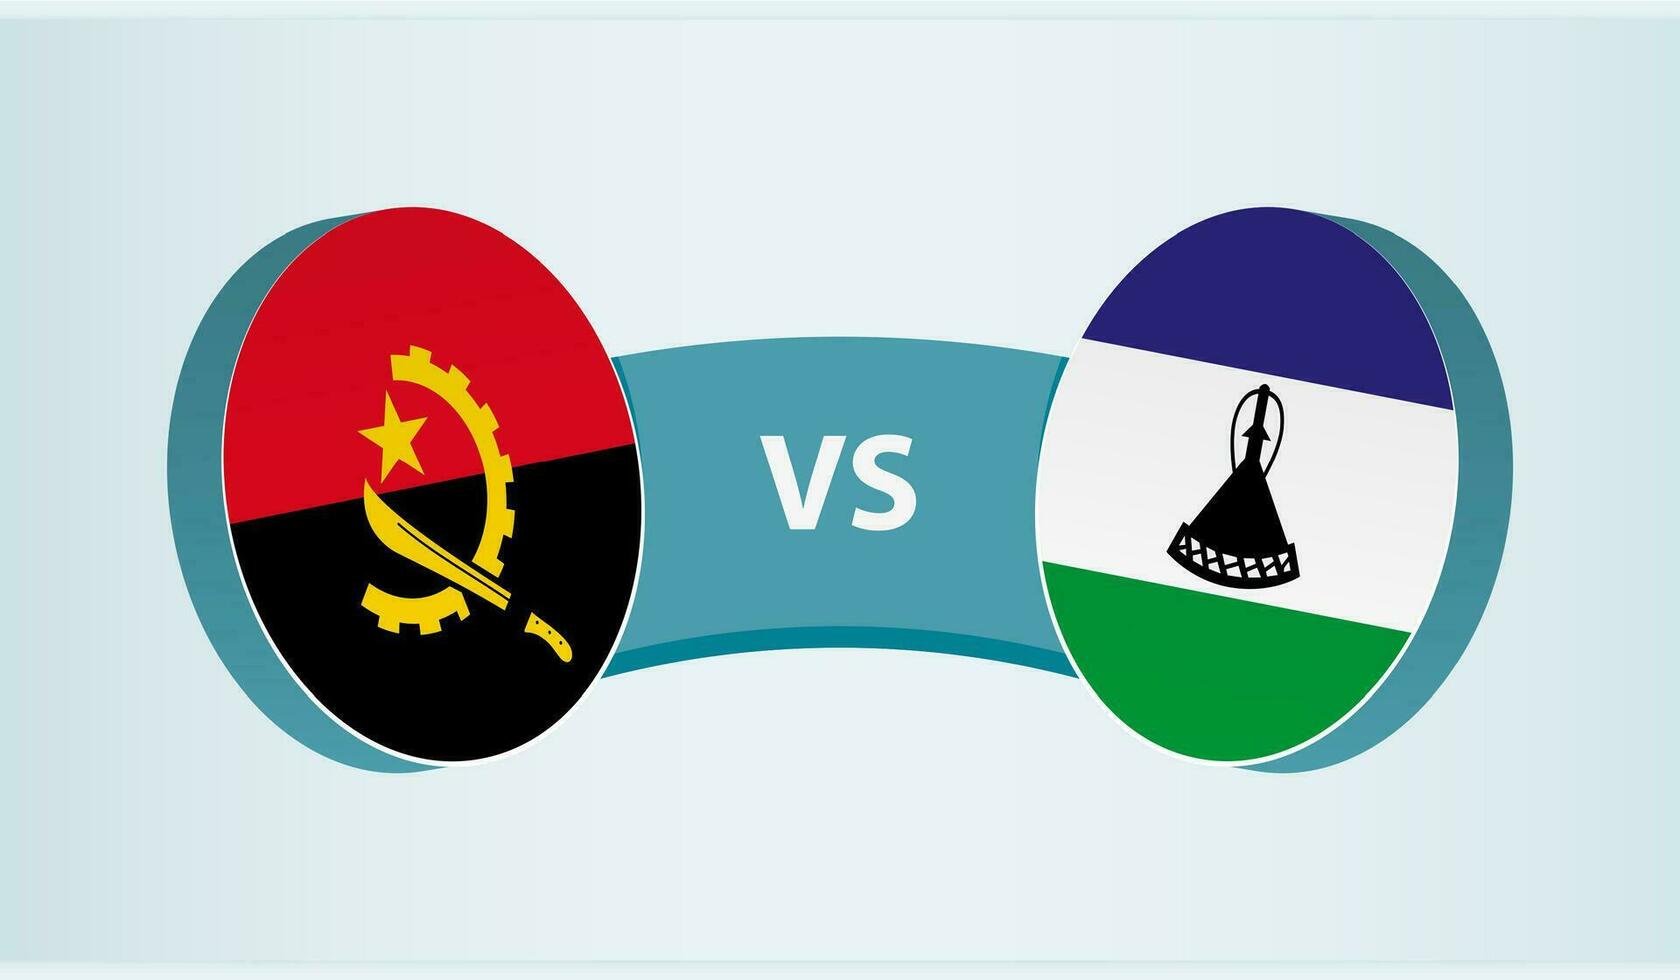 Angola versus Lesotho, team sports competition concept. vector